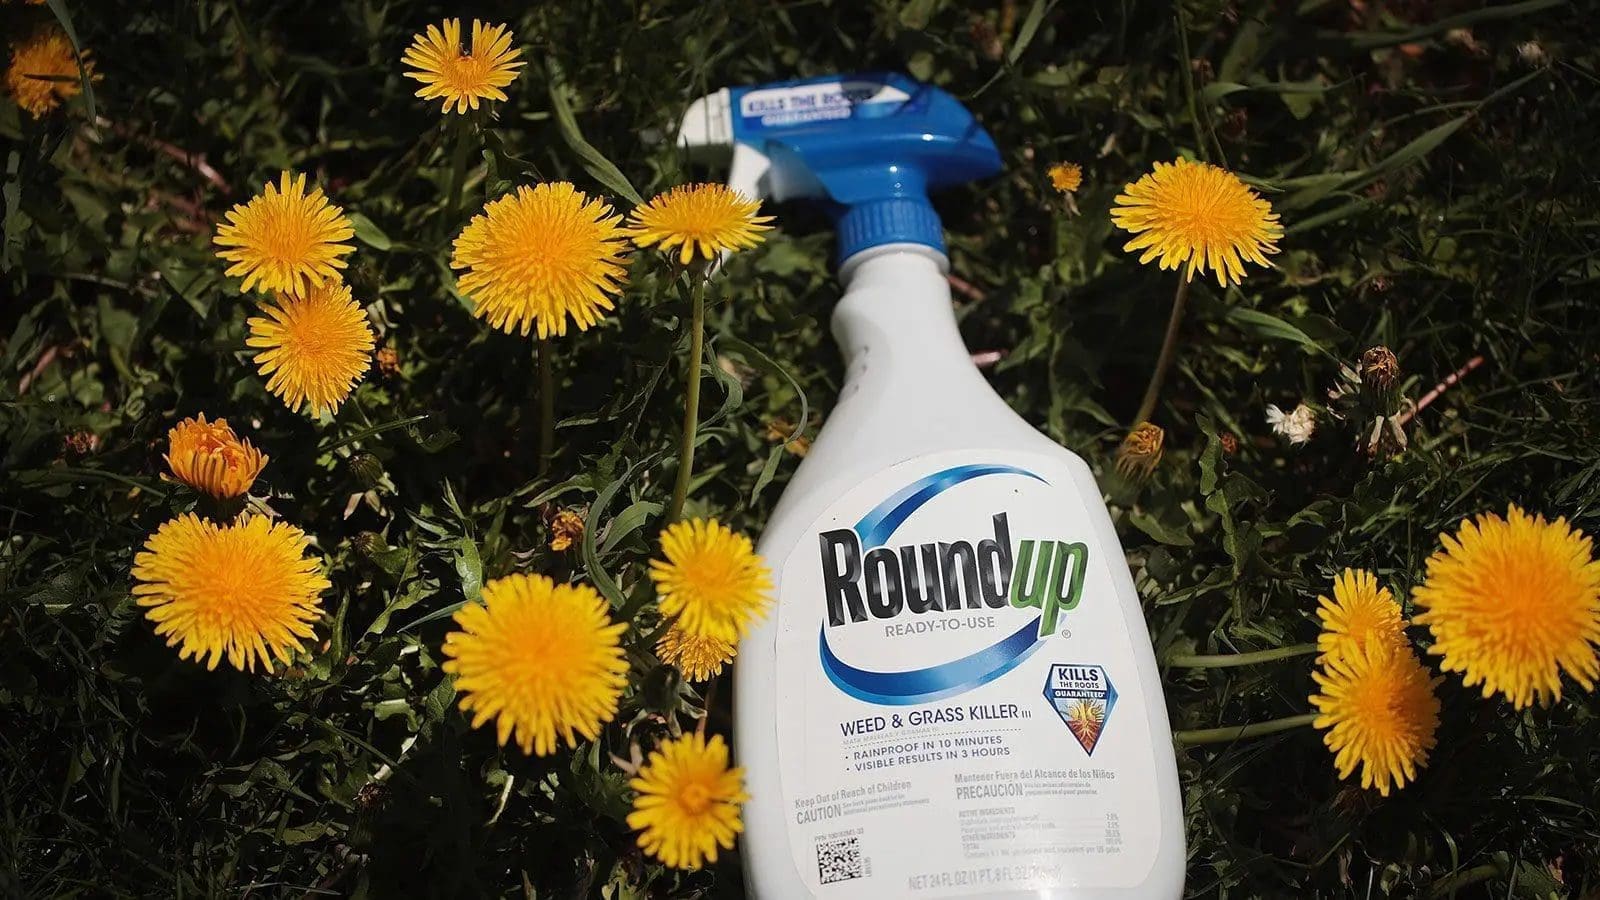 Science and politics collide as EU decision on glyphosate reauthorization looms